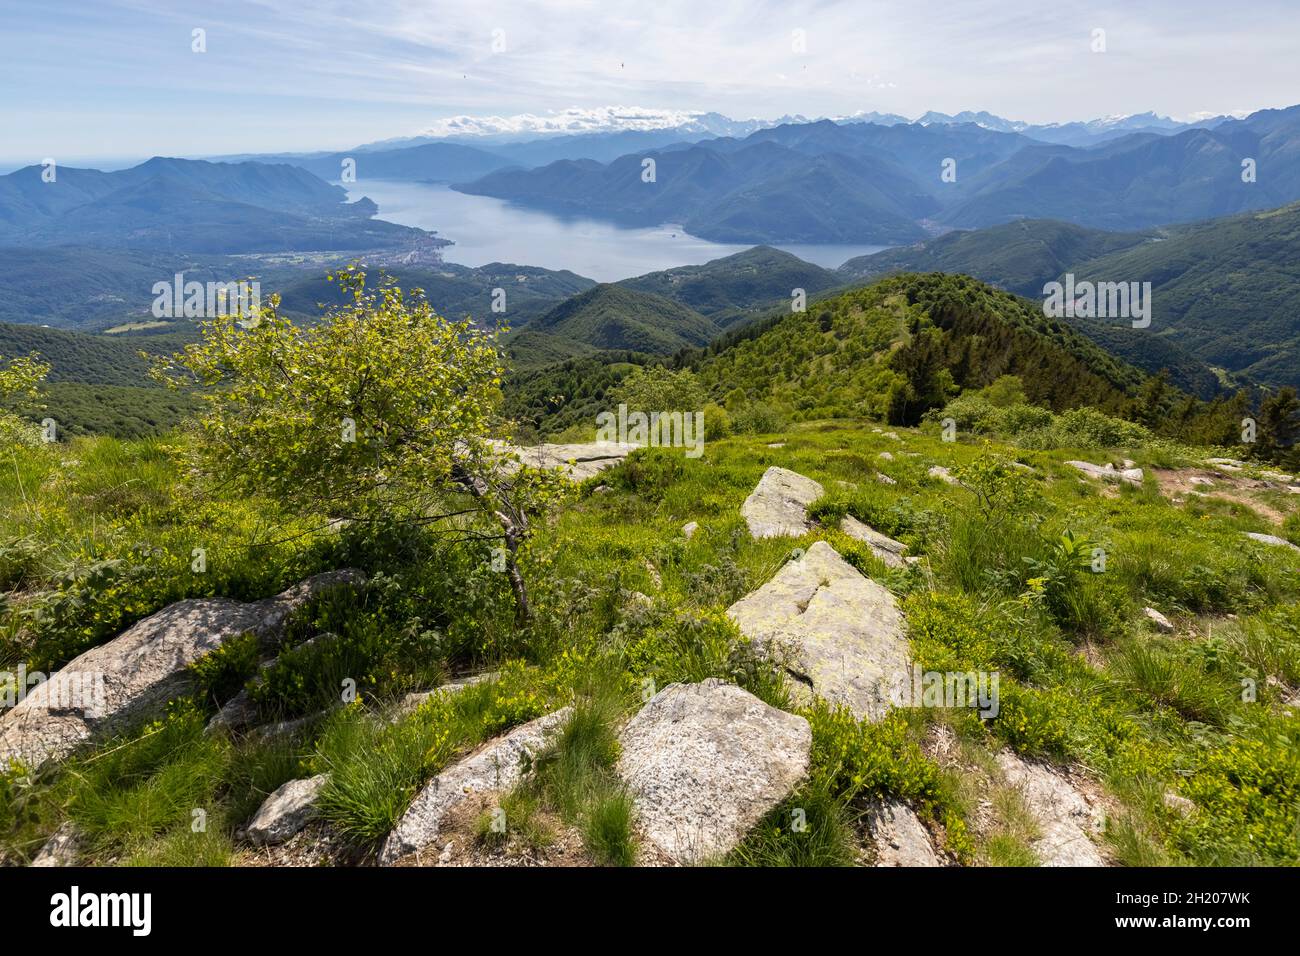 View of Lake Maggiore and piedmont mountains from the top of Monte Lema. Dumenza, Varese district, Lombardy, Italy. Stock Photo